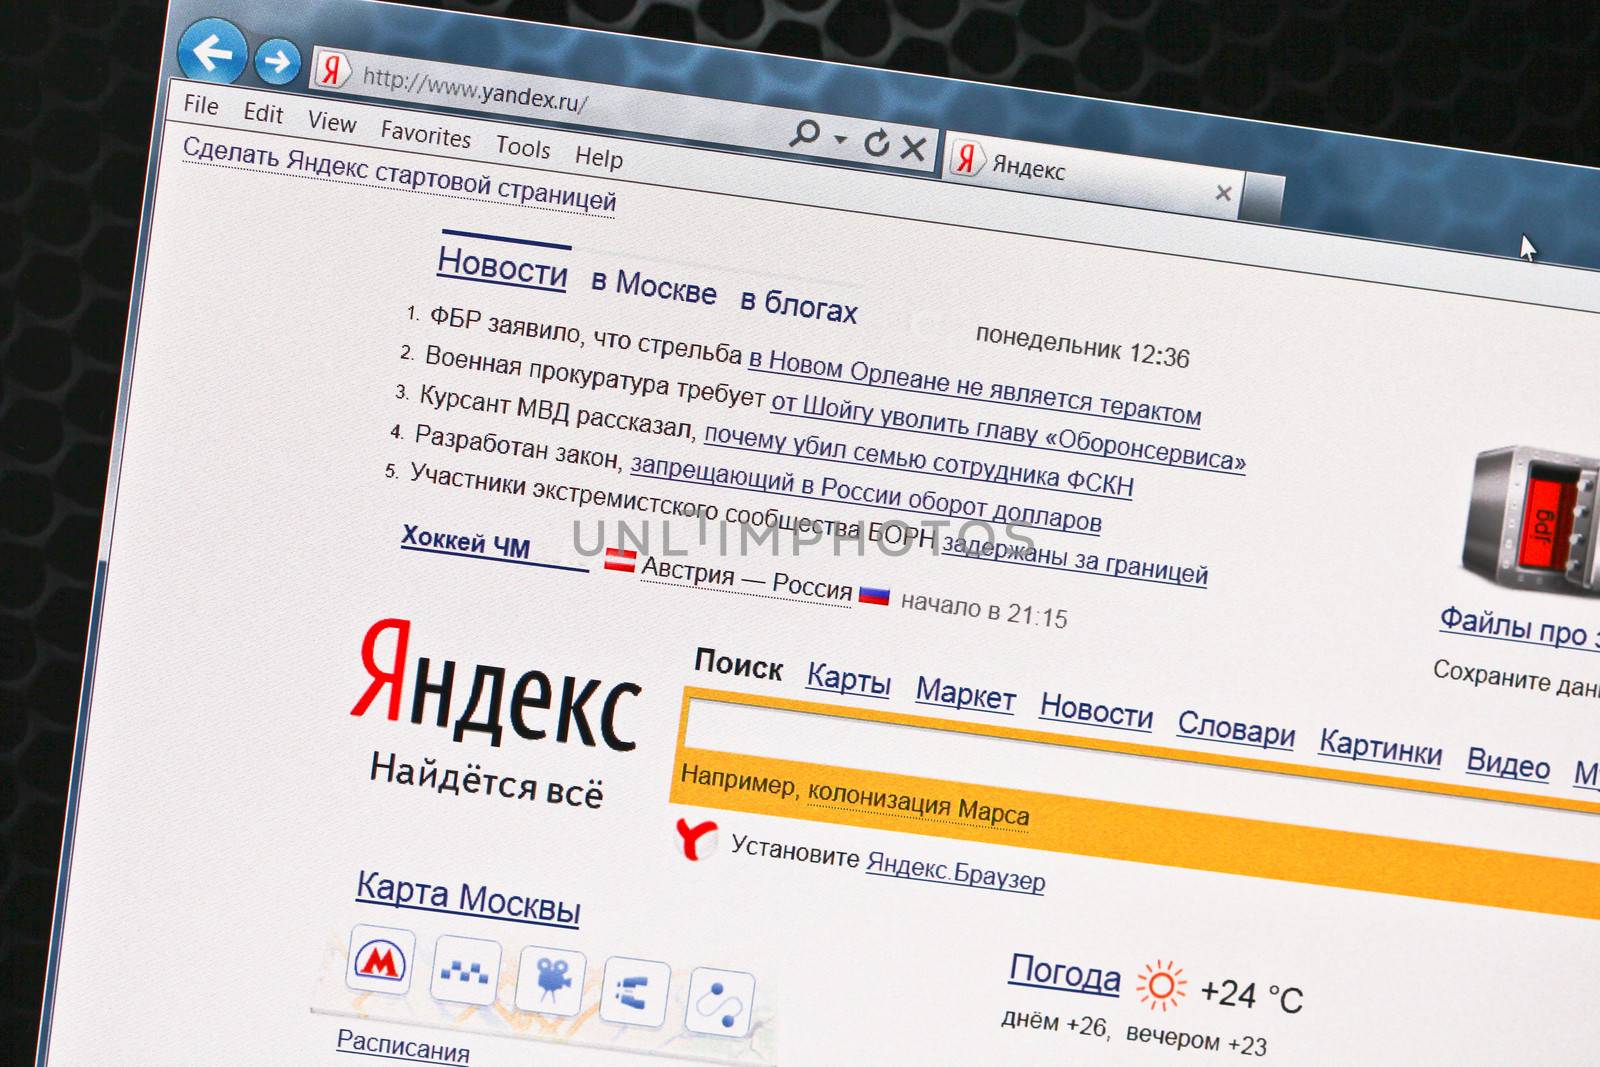 Open site of SEO Yandex by vicdemid